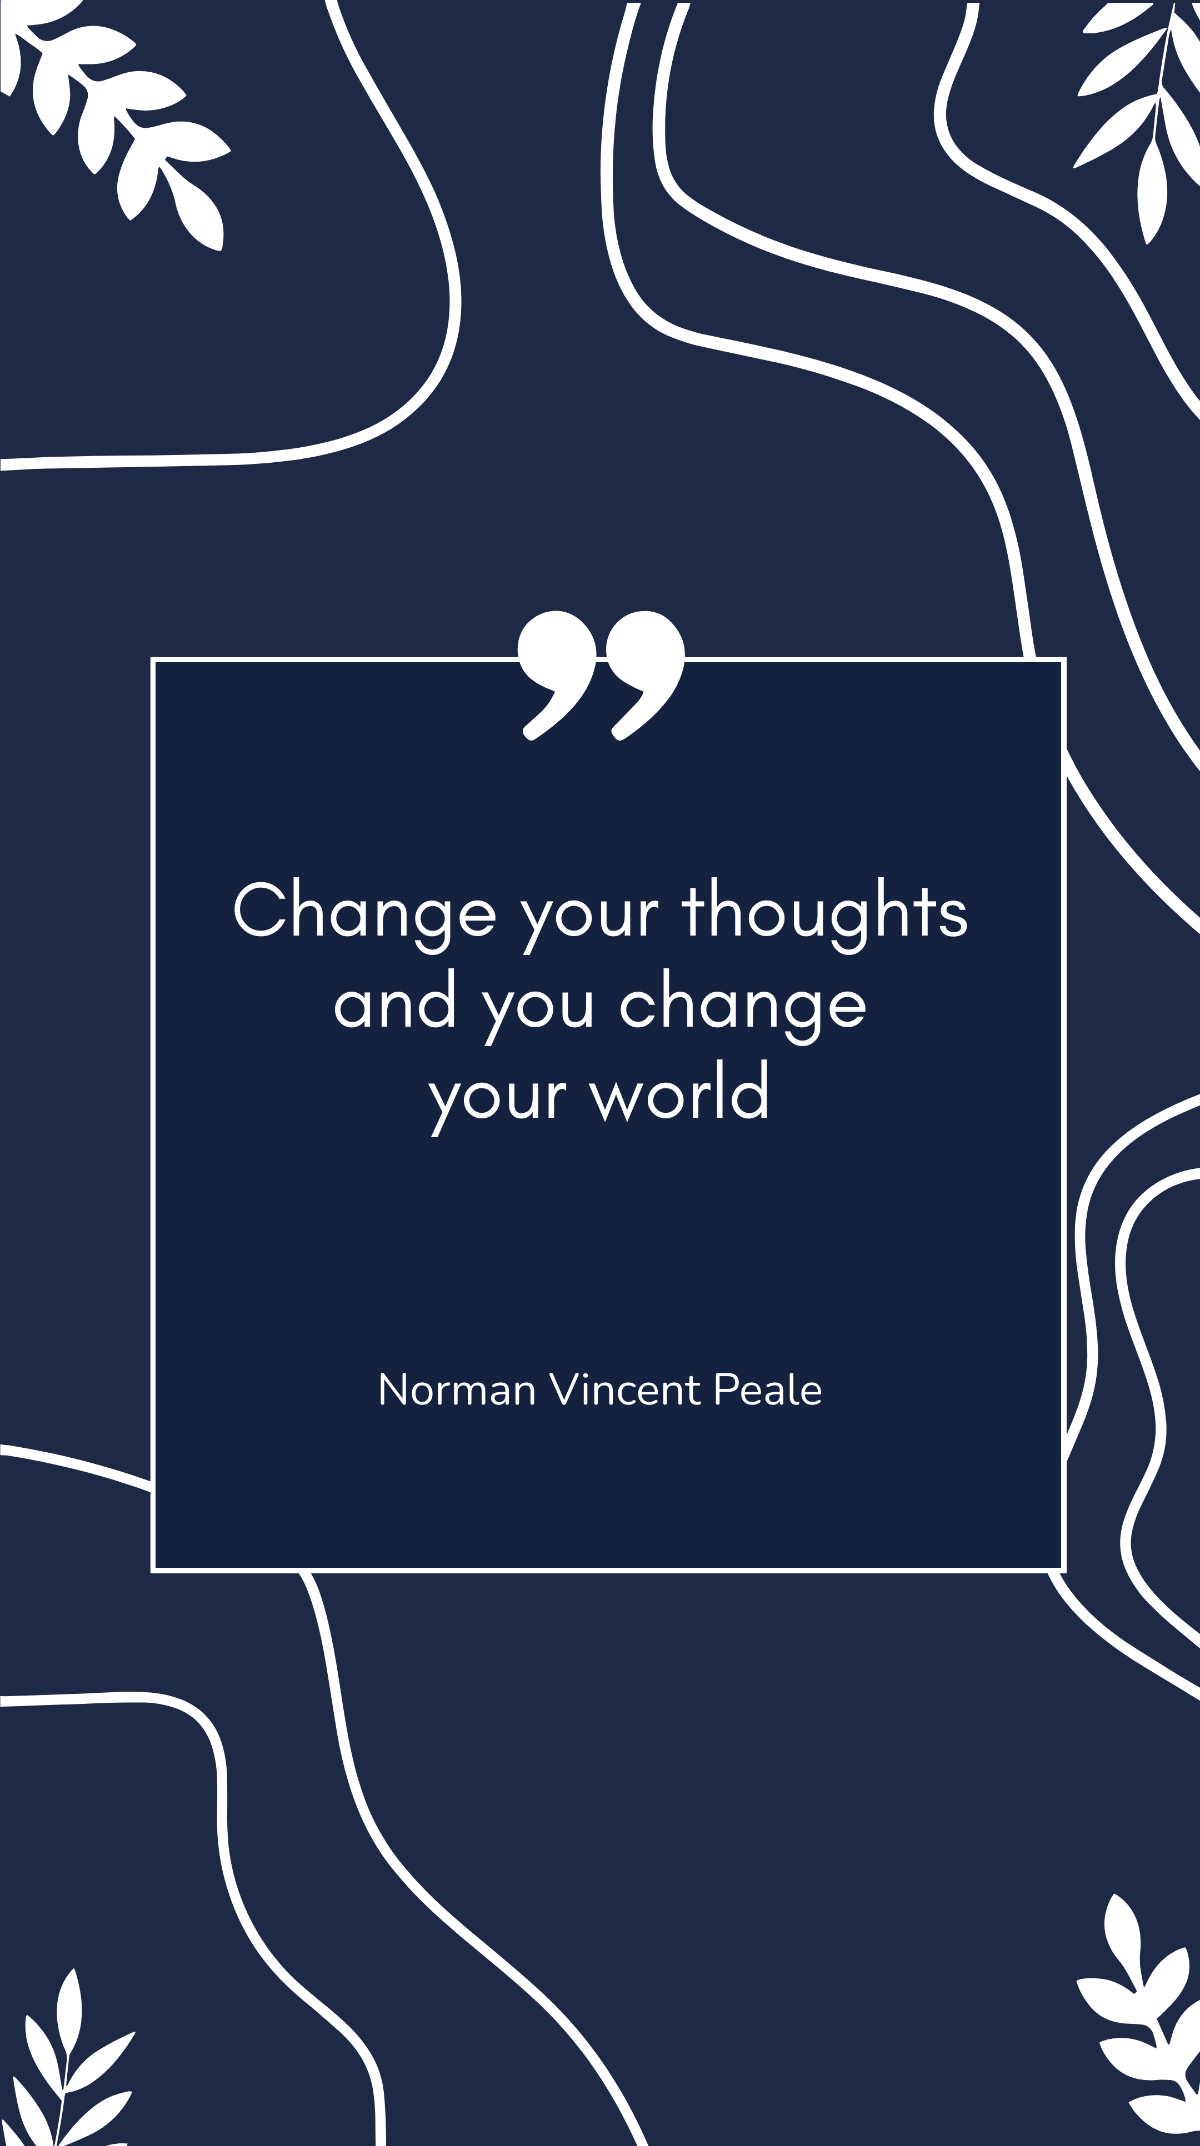 Norman Vincent Peale - Change your thoughts and you change your world